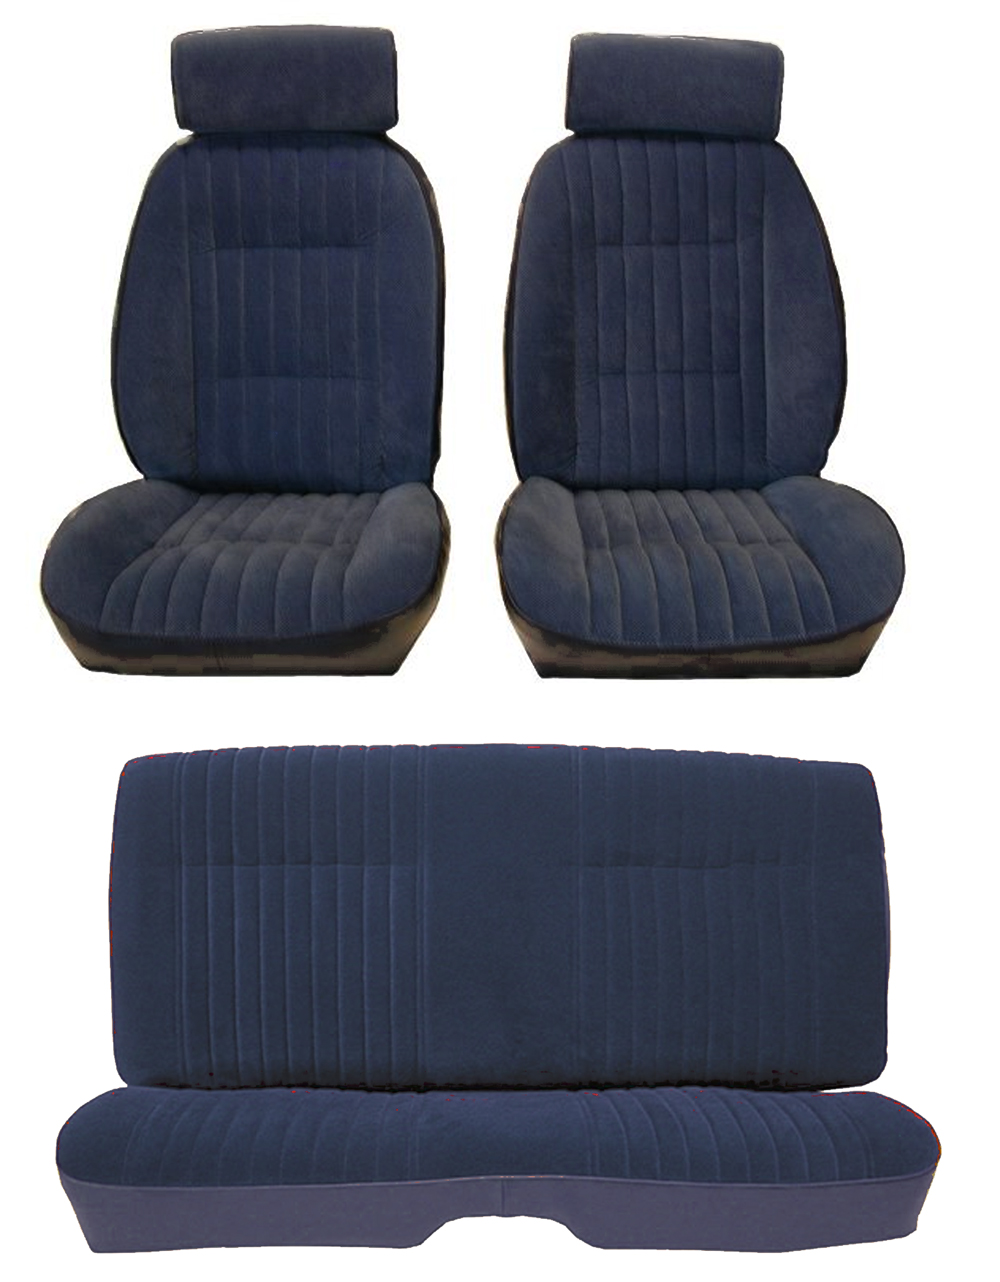 81-88 Monte Carlo SS Front Bucket and Rear Seat Covers Dark Blue Velour w/Vinyl Sides